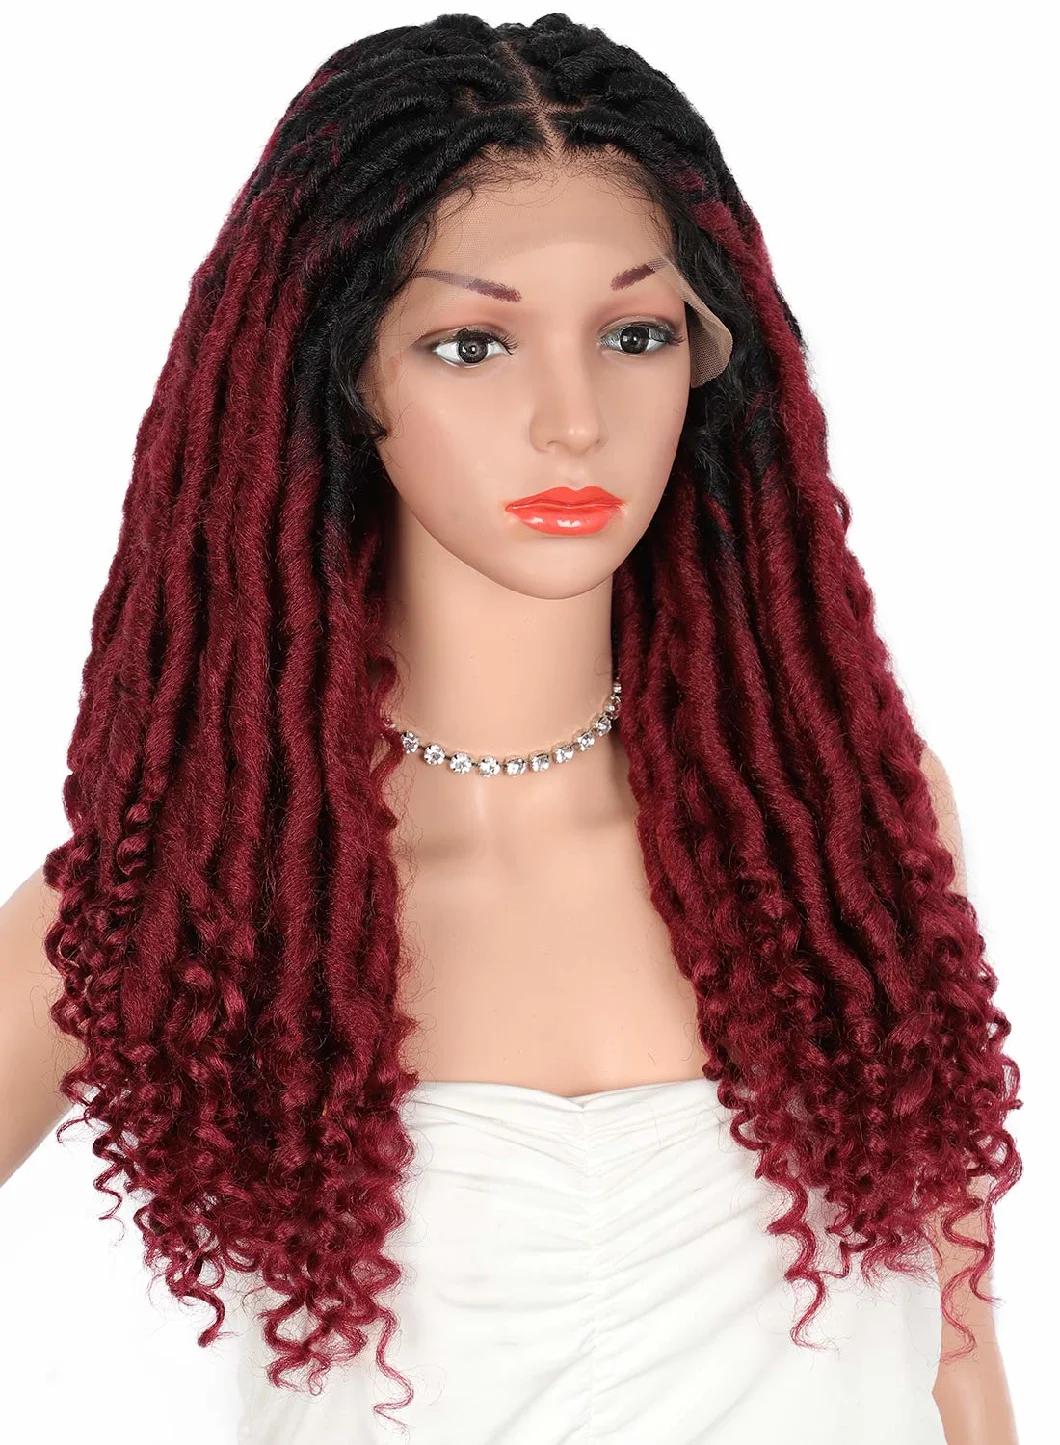 4X4 Swiss Lace Front Braided Wigs with Curls Ends Synthetic Dreadlocks Twist Braids Wigs with Baby Hair for Dark Skin